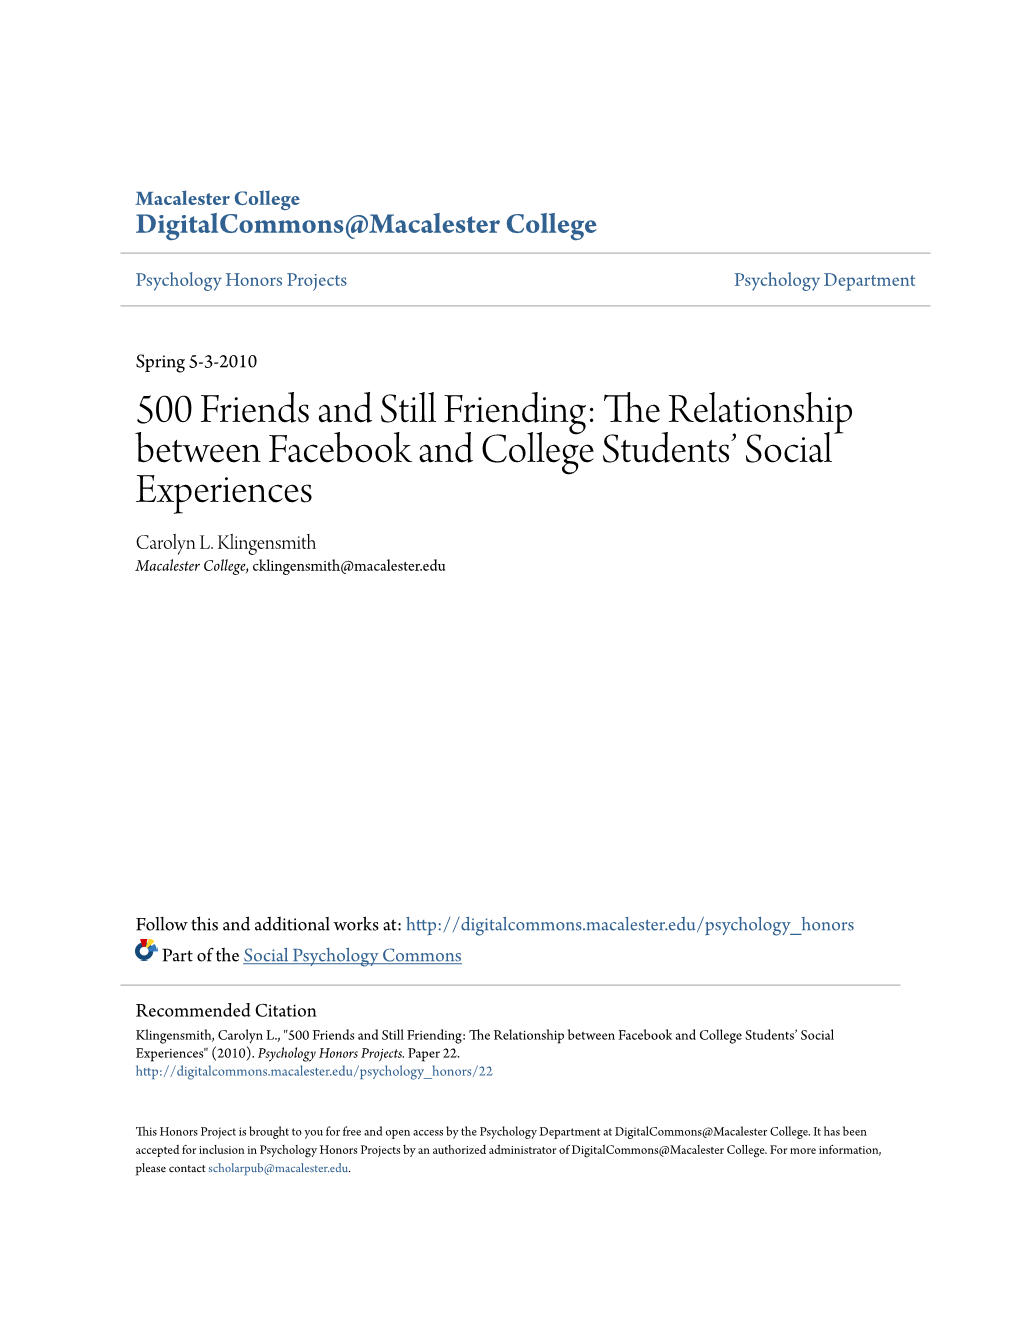 The Relationship Between Facebook and College Students' Social